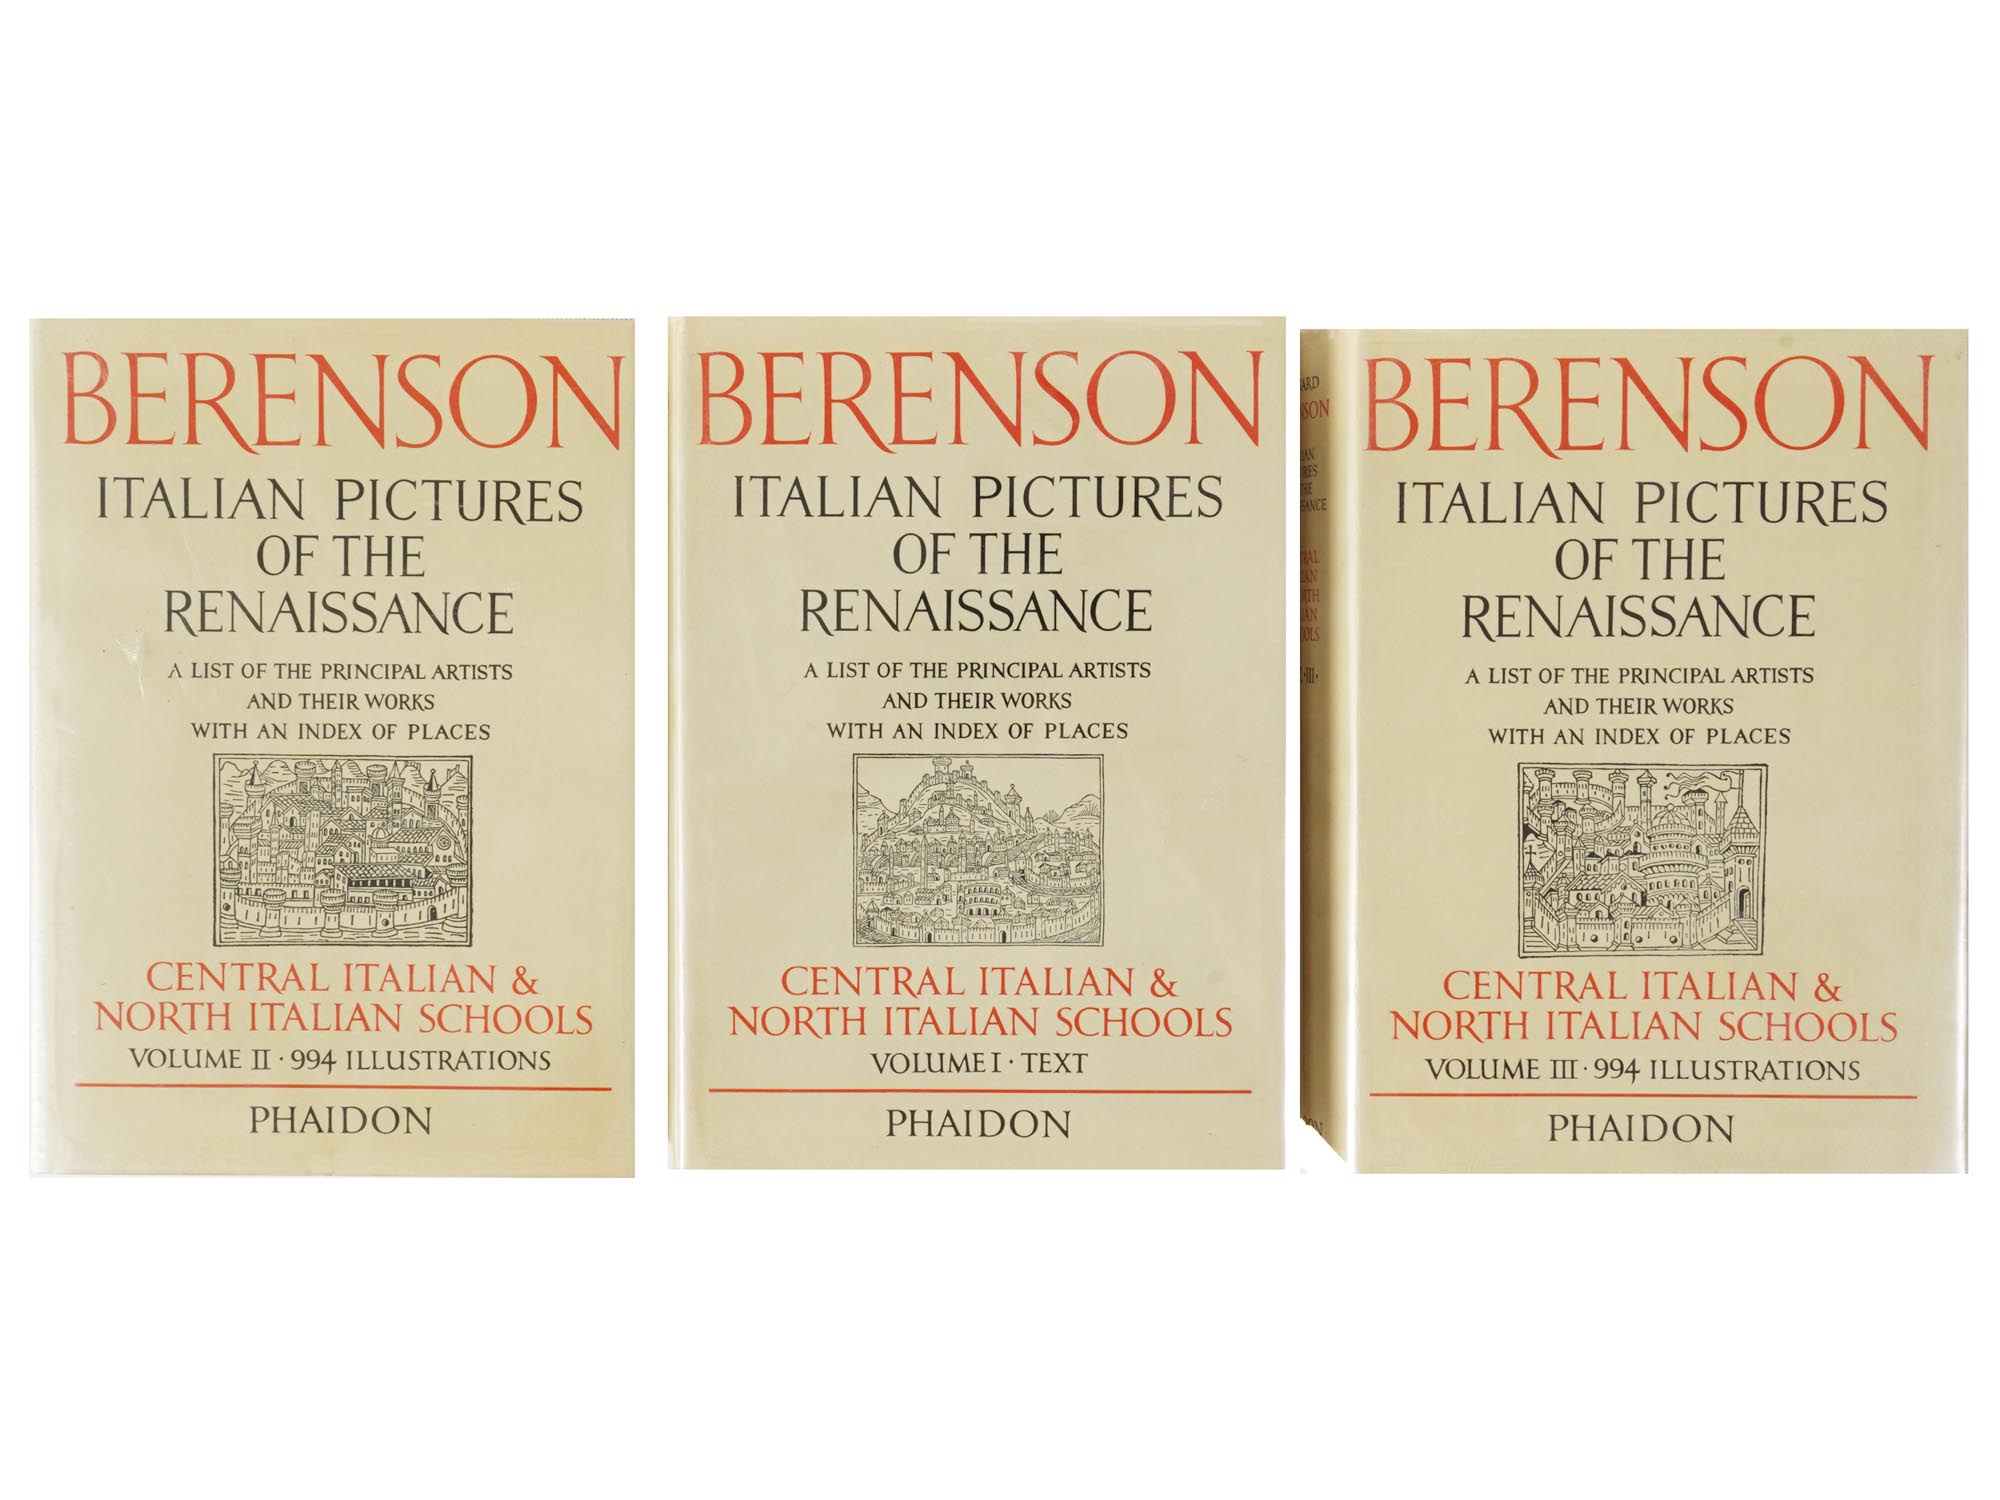 ITALIAN PICTURES OF THE RENAISSANCE BY BERENSON